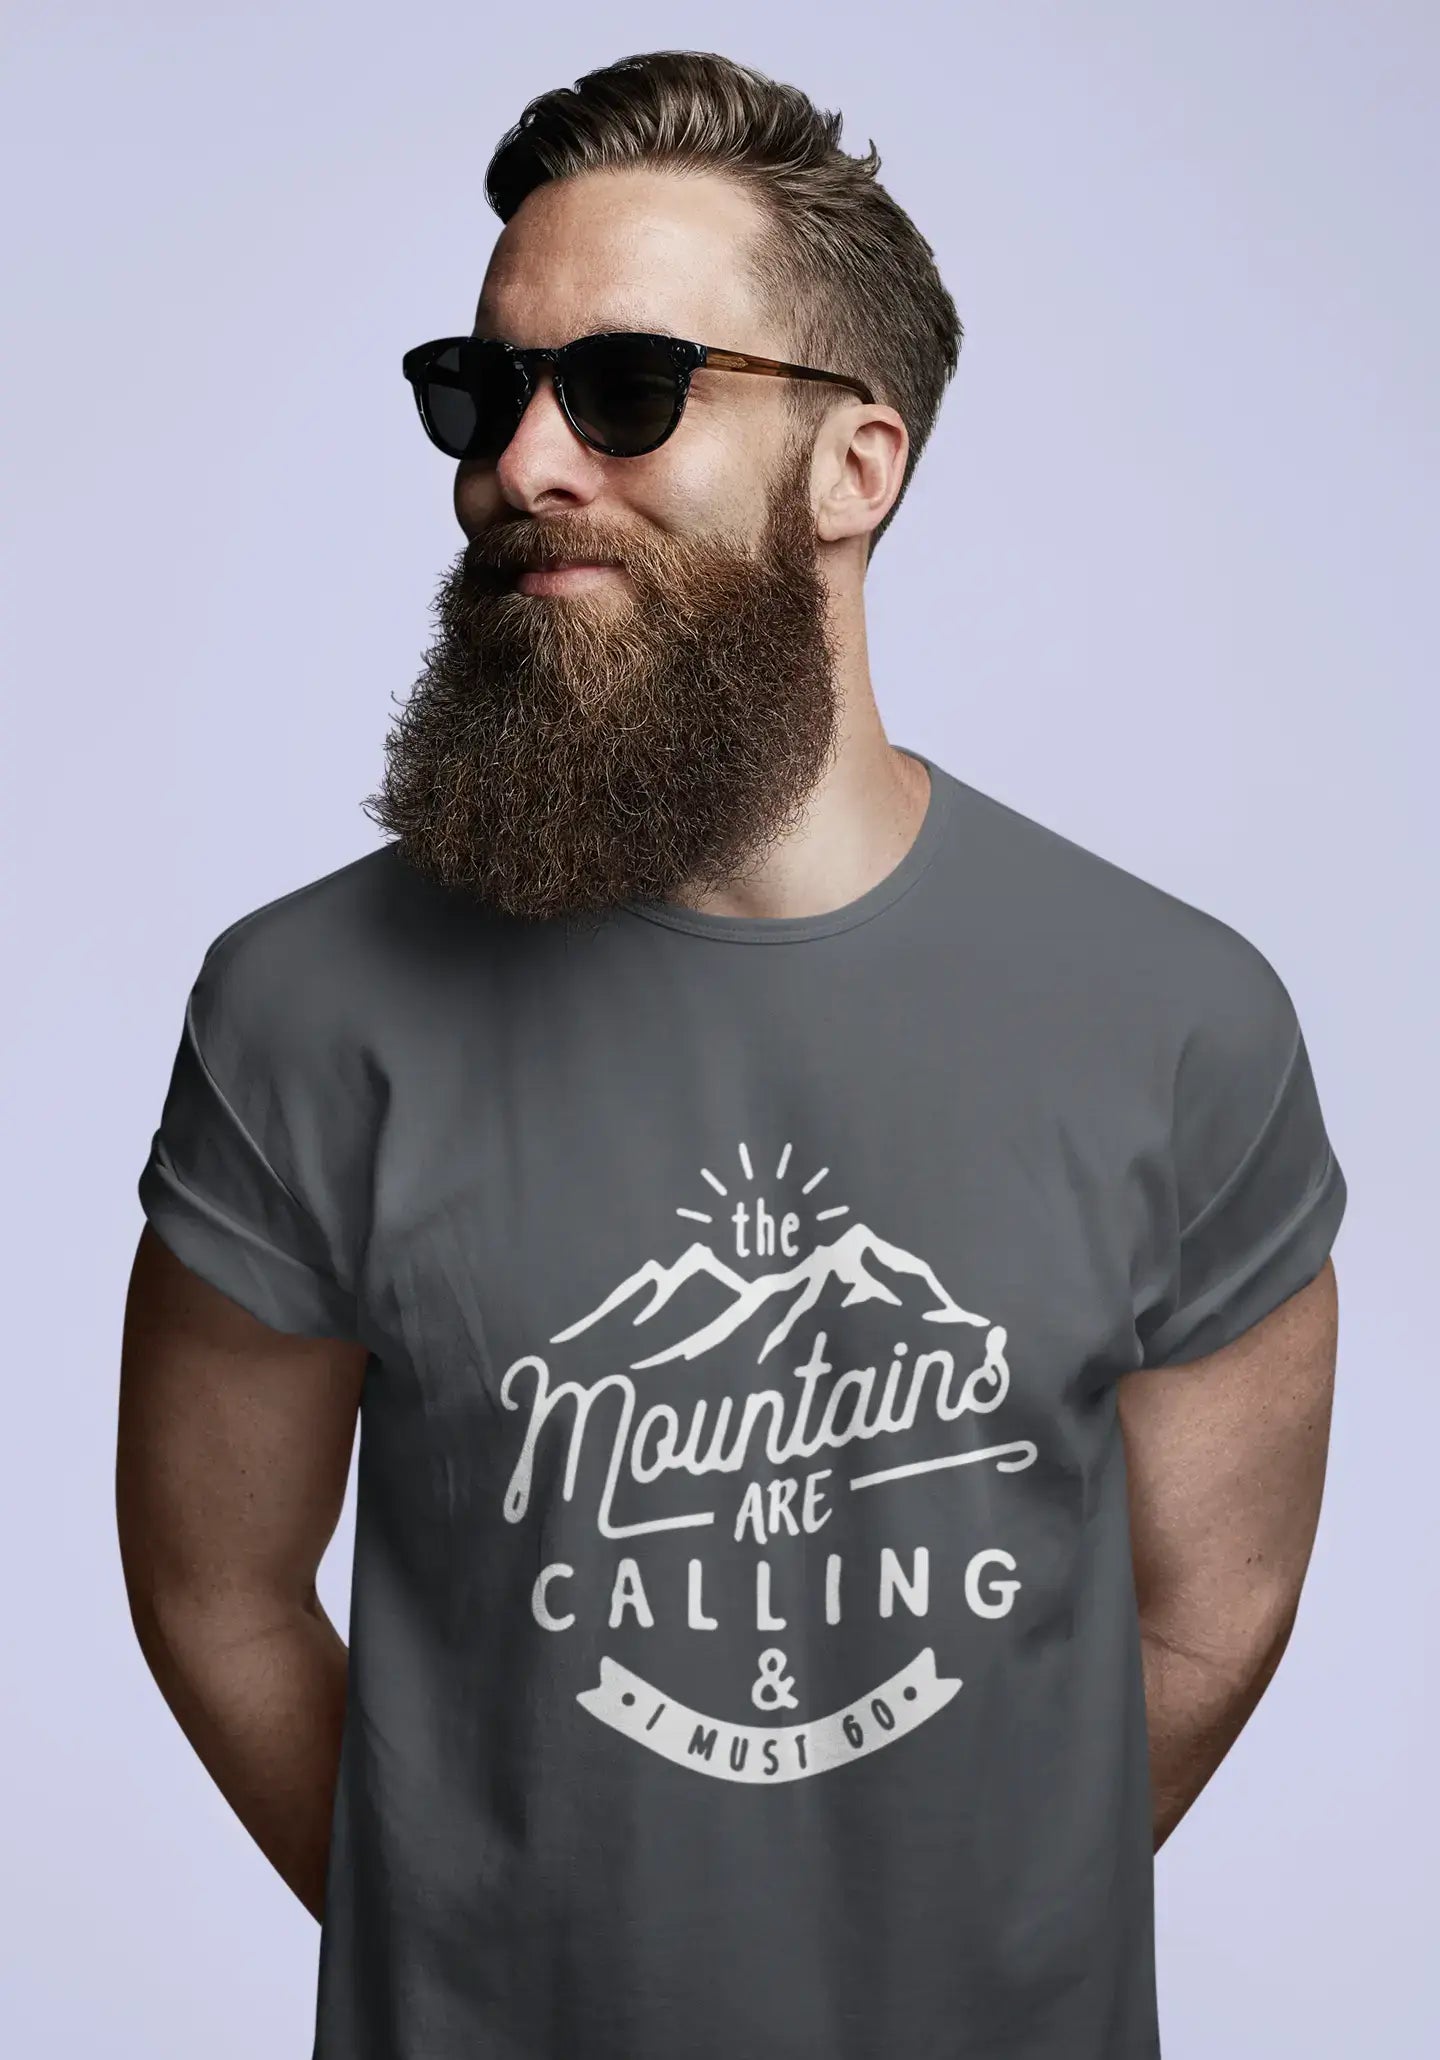 ULTRABASIC - Graphic Printed Men's The Mountains Are Calling And I Must Go Hiking Tee Tango Red